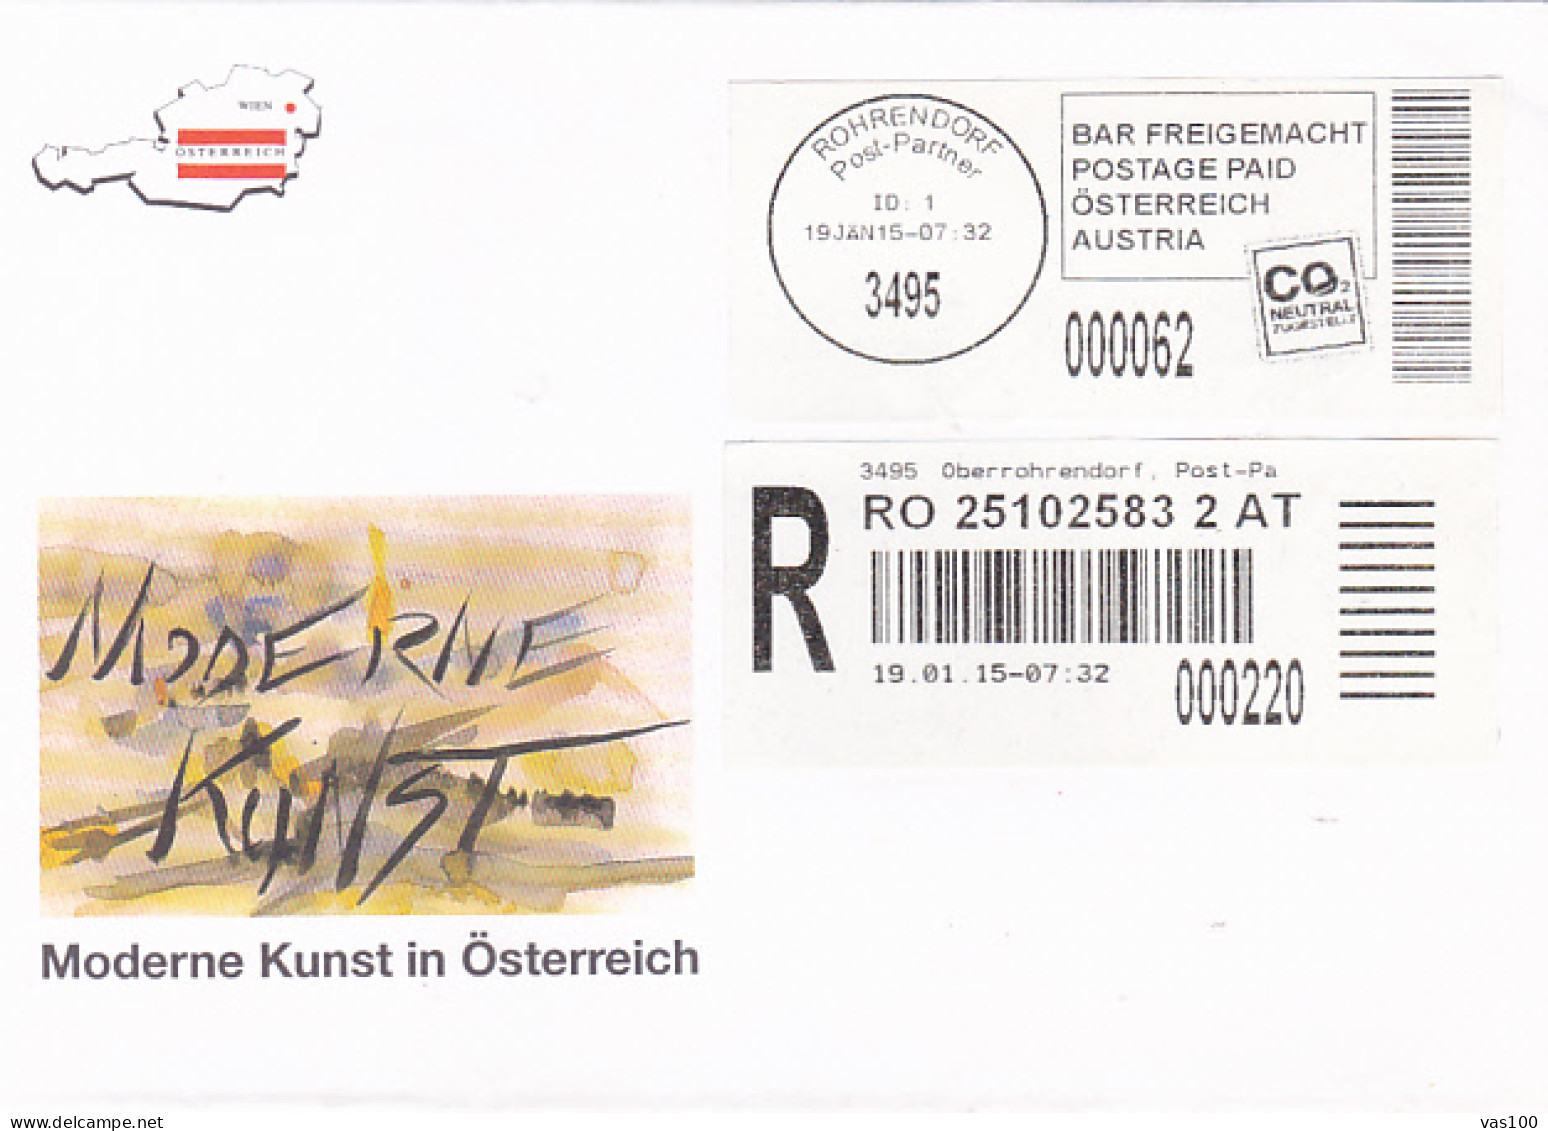 MODERN ART IN AUSTRIA, BARCODE, REGISTERED SPECIAL COVER, 2015, AUSTRIA - Lettres & Documents